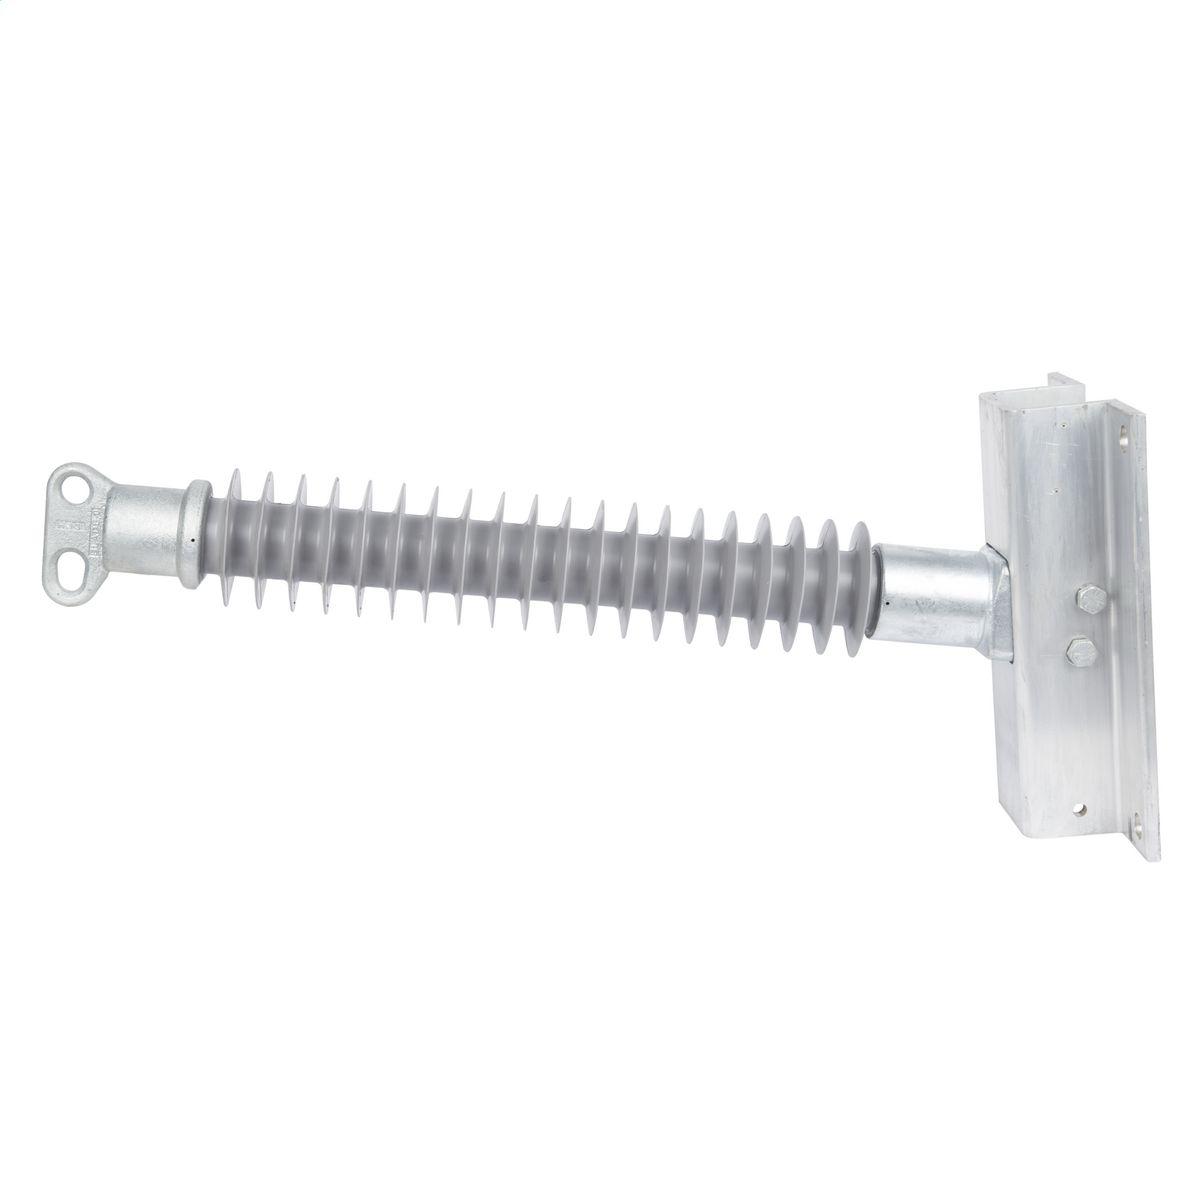 Hubbell P300052S0030 3.0" Line Post, 2 hole blade, Aluminum Flat base9x13 7/8" bolts  ; Made from hydrophobic silicone polymer ; 